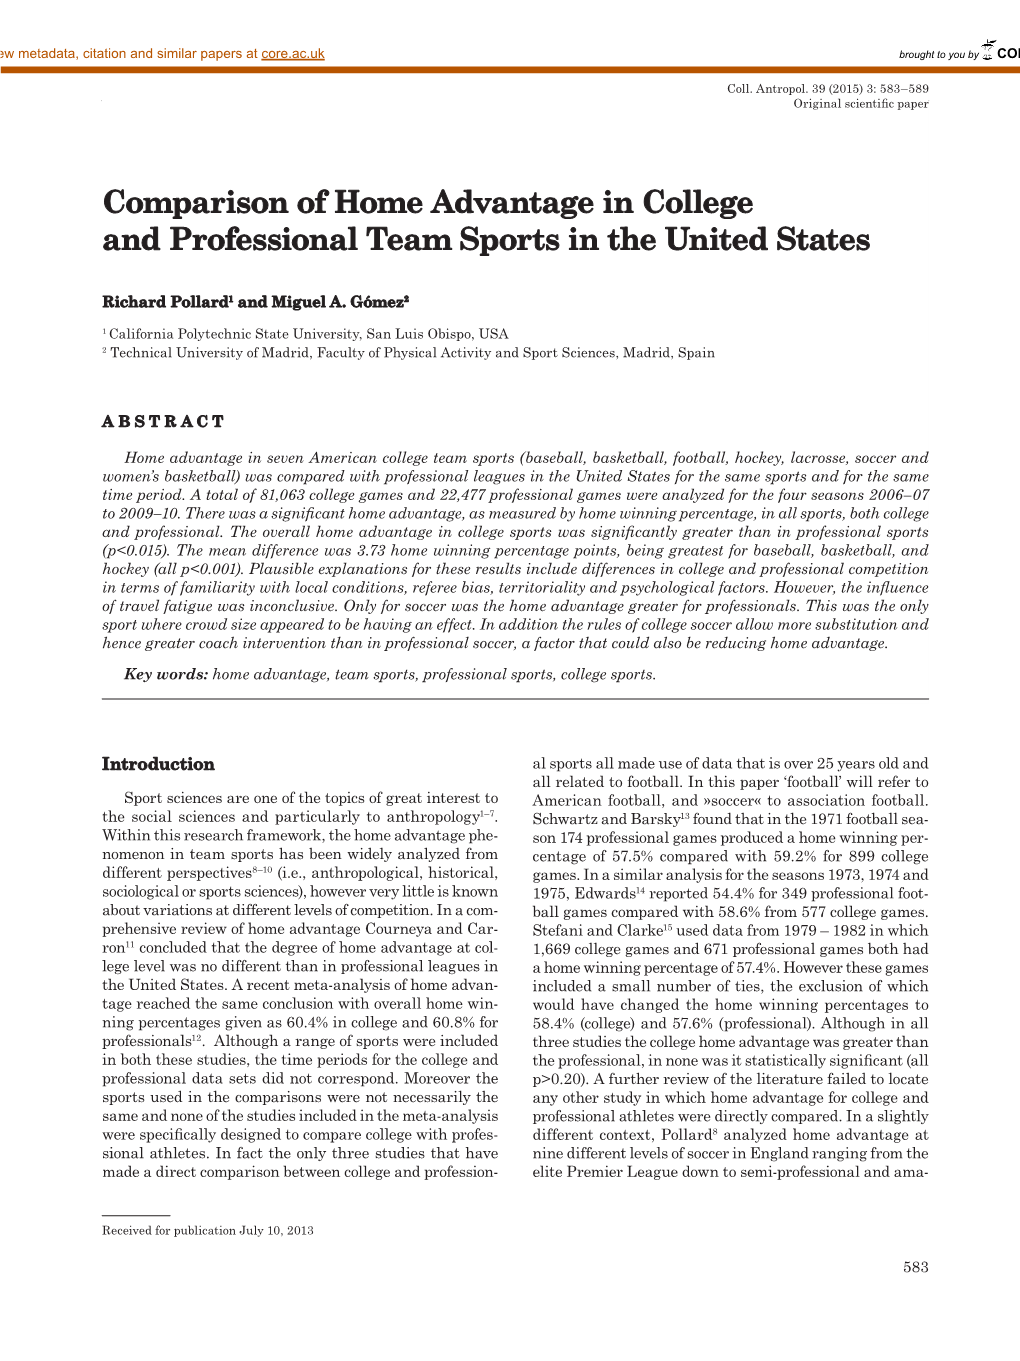 Comparison of Home Advantage in College and Professional Team Sports in the United States